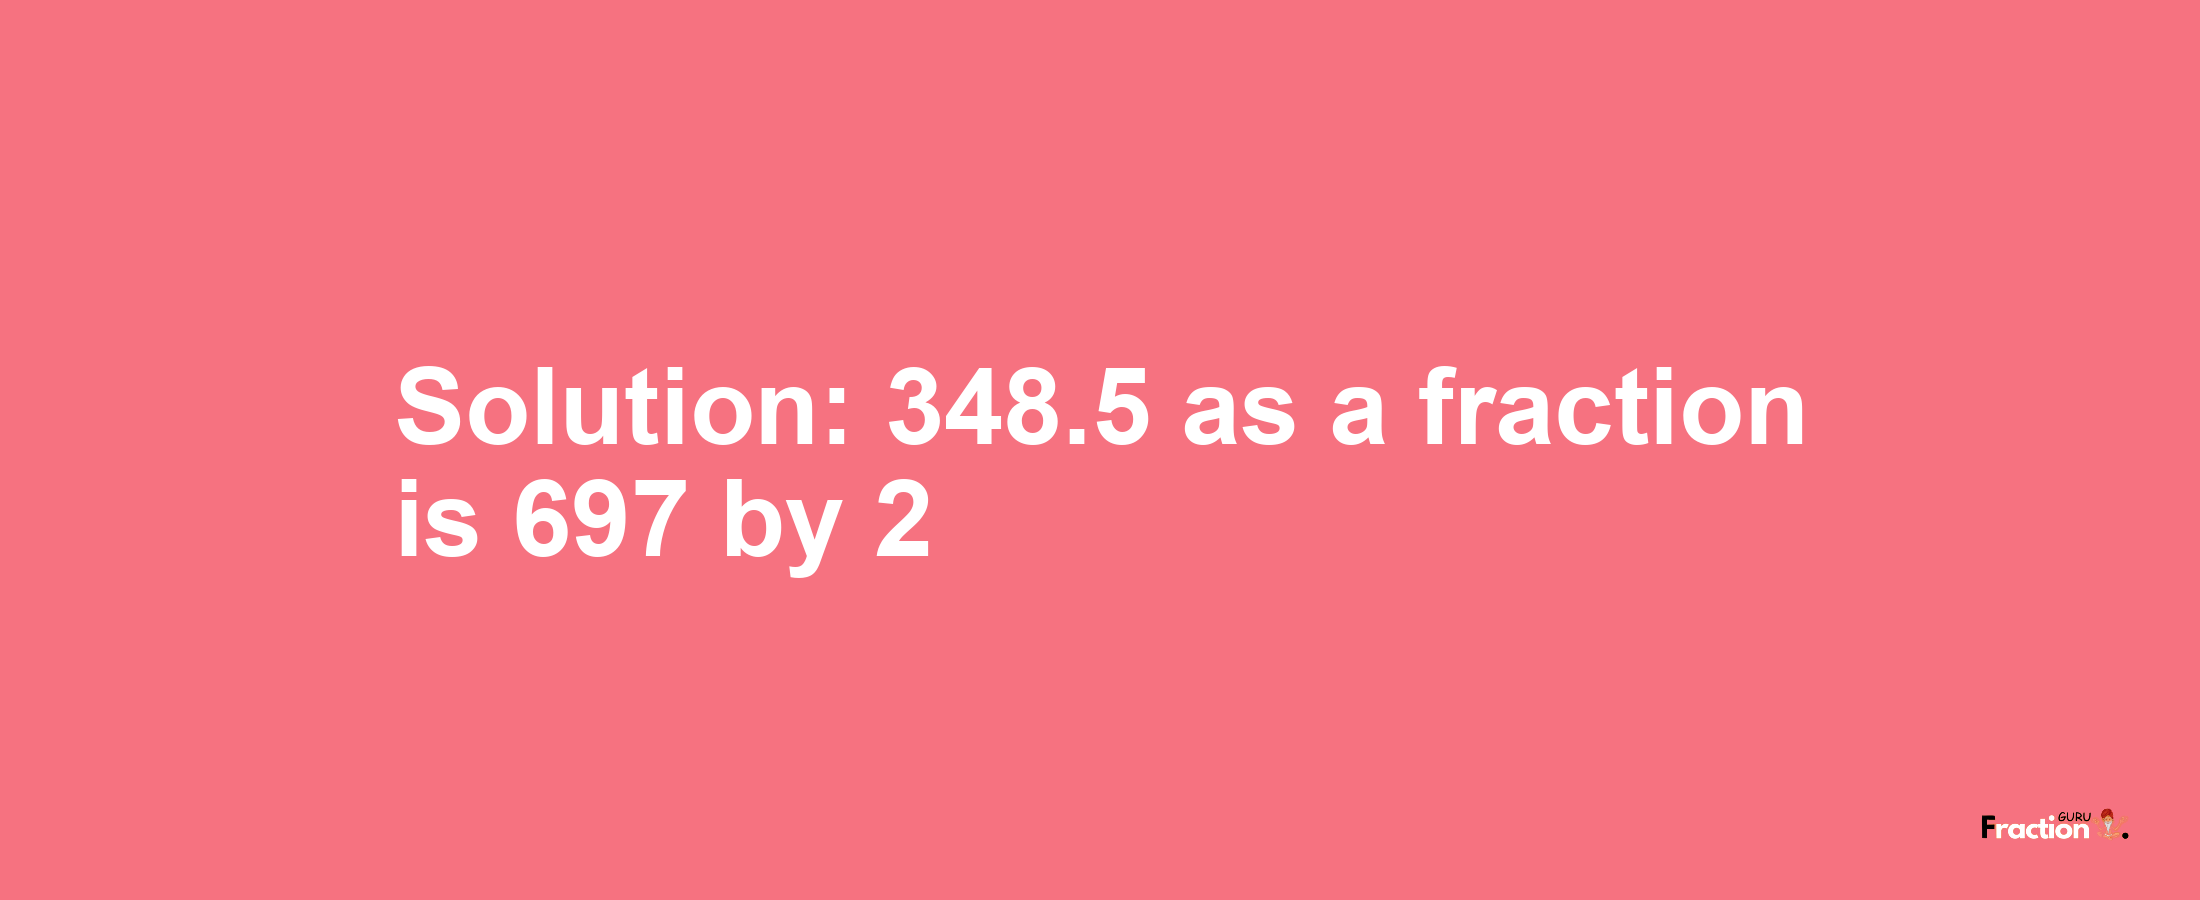 Solution:348.5 as a fraction is 697/2